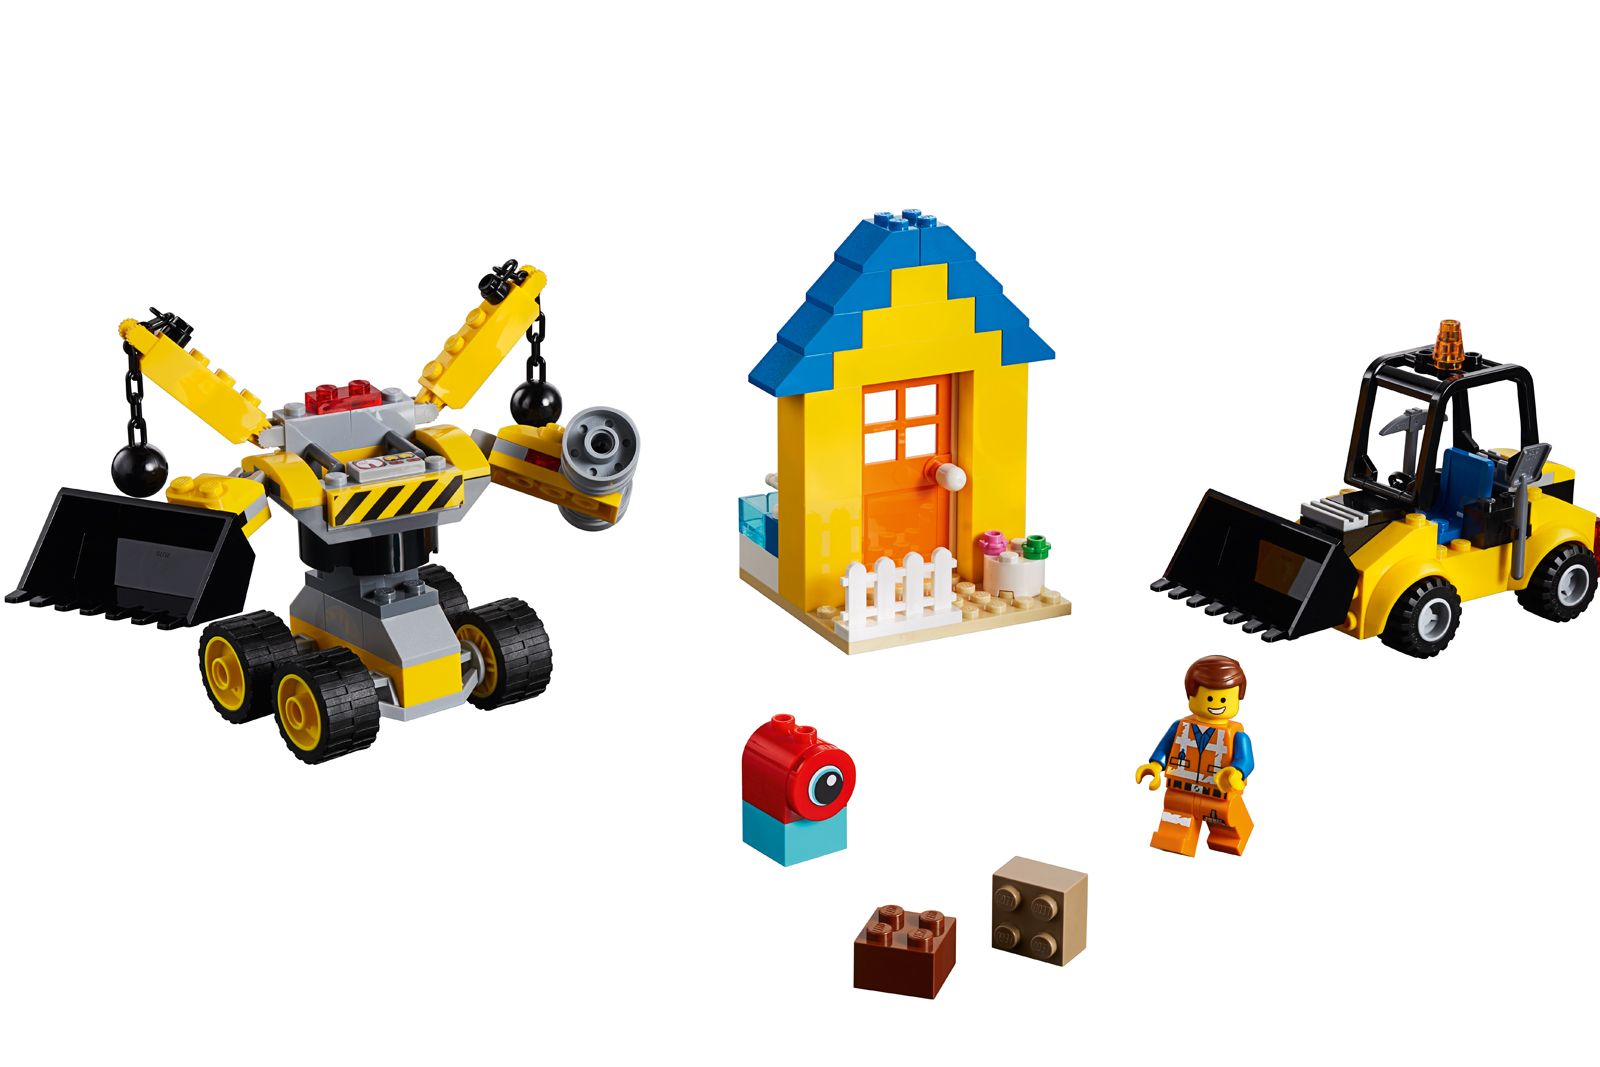 21 Lego sets from The Lego Movie 2 The Second Part - every set covered image 9